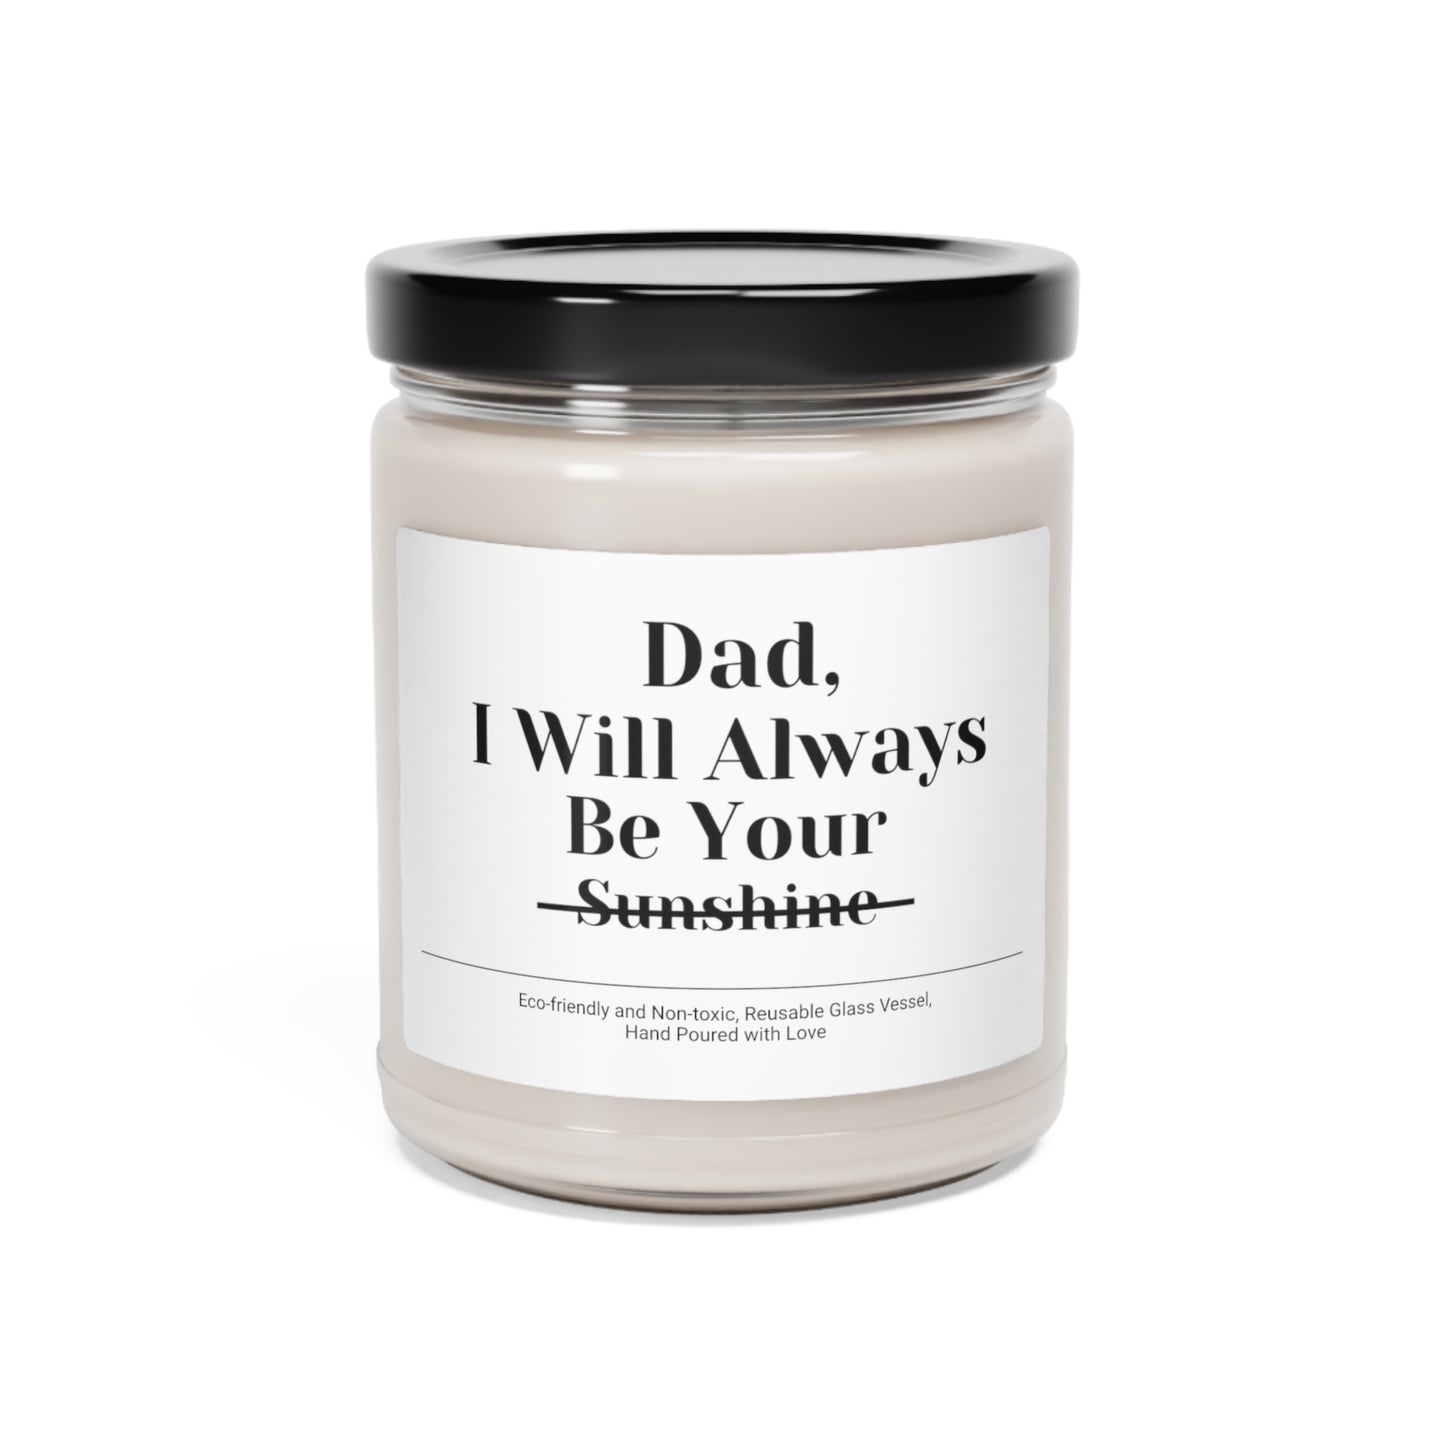 dad-10-Scented Soy Candle, 9oz